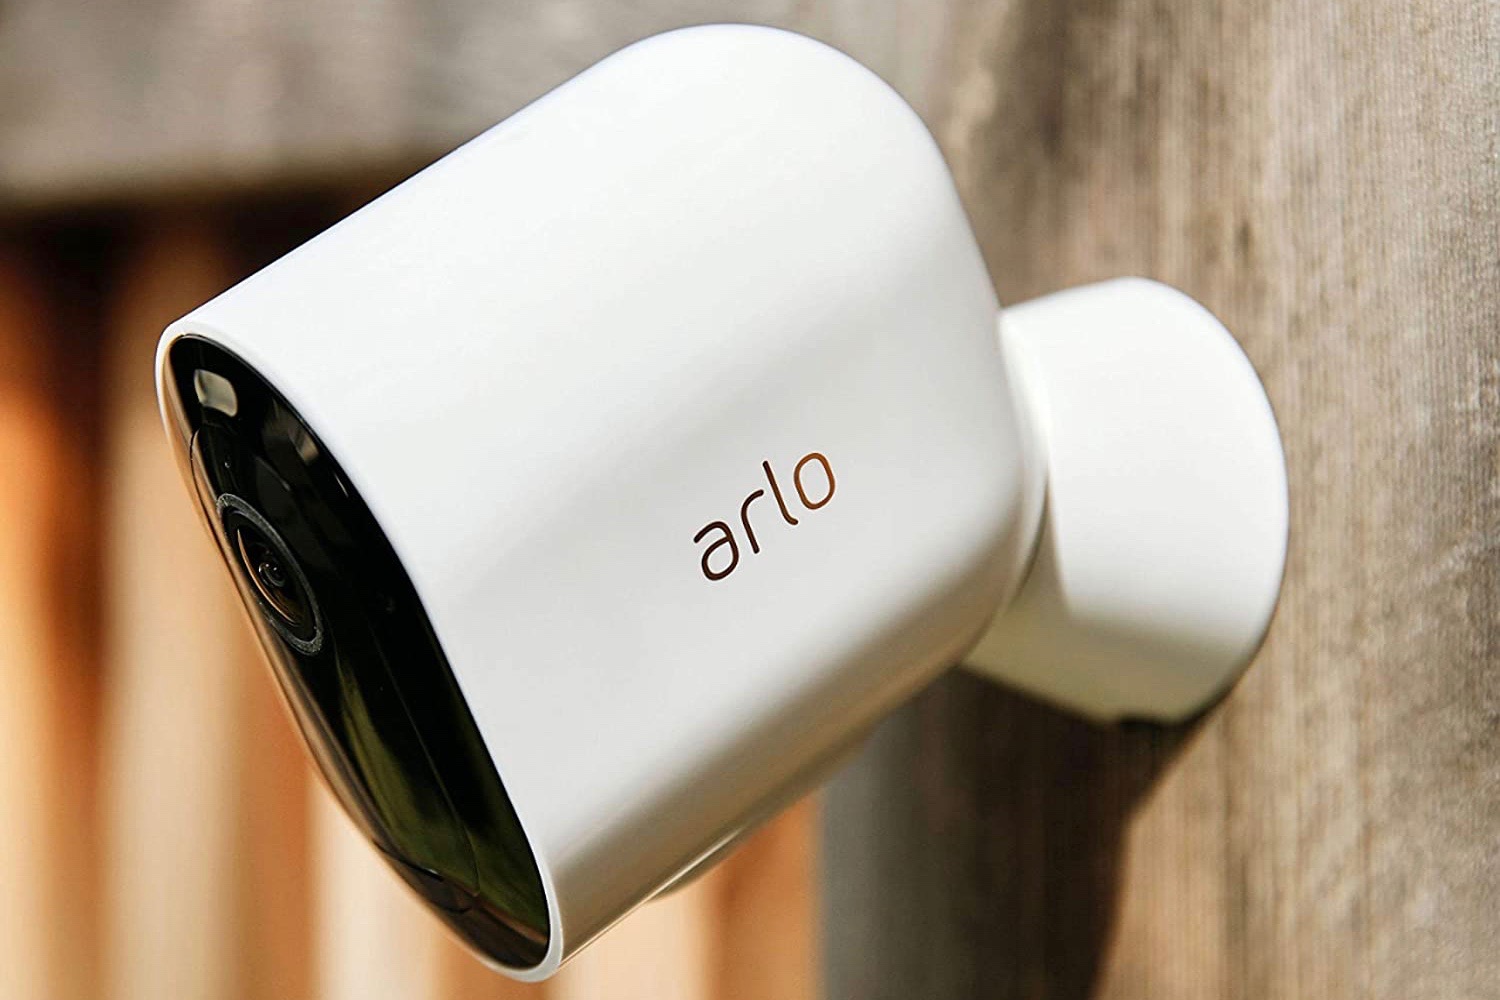 Ring Home Security Camera Cost and Pricing Plans in 2023